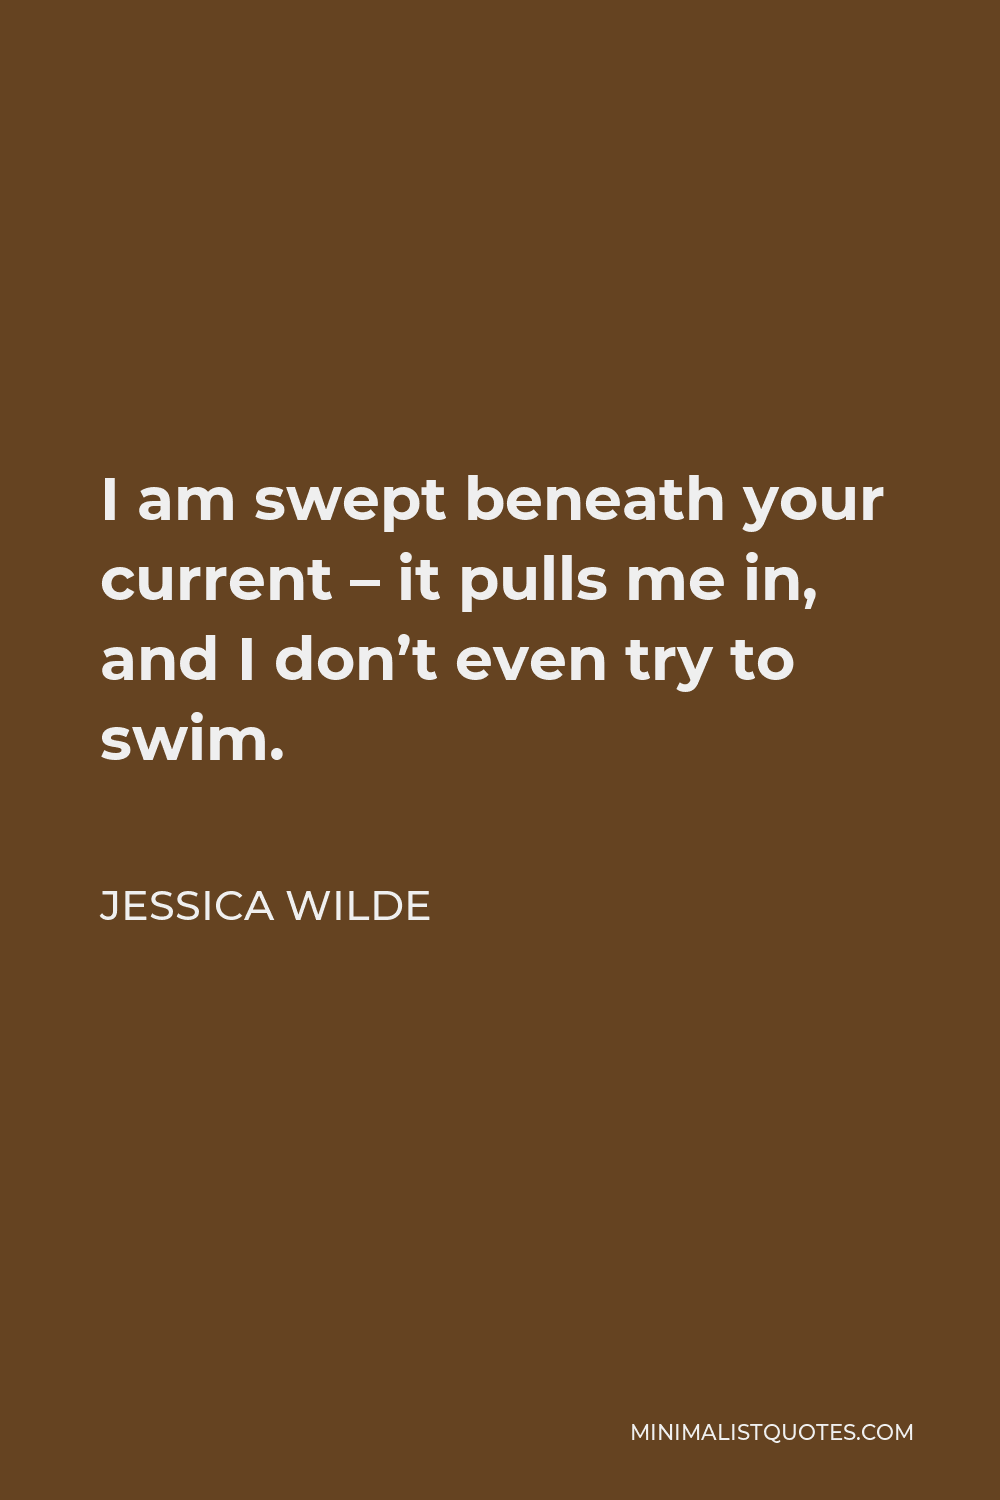 Jessica Wilde Quote - I am swept beneath your current – it pulls me in, and I don’t even try to swim.